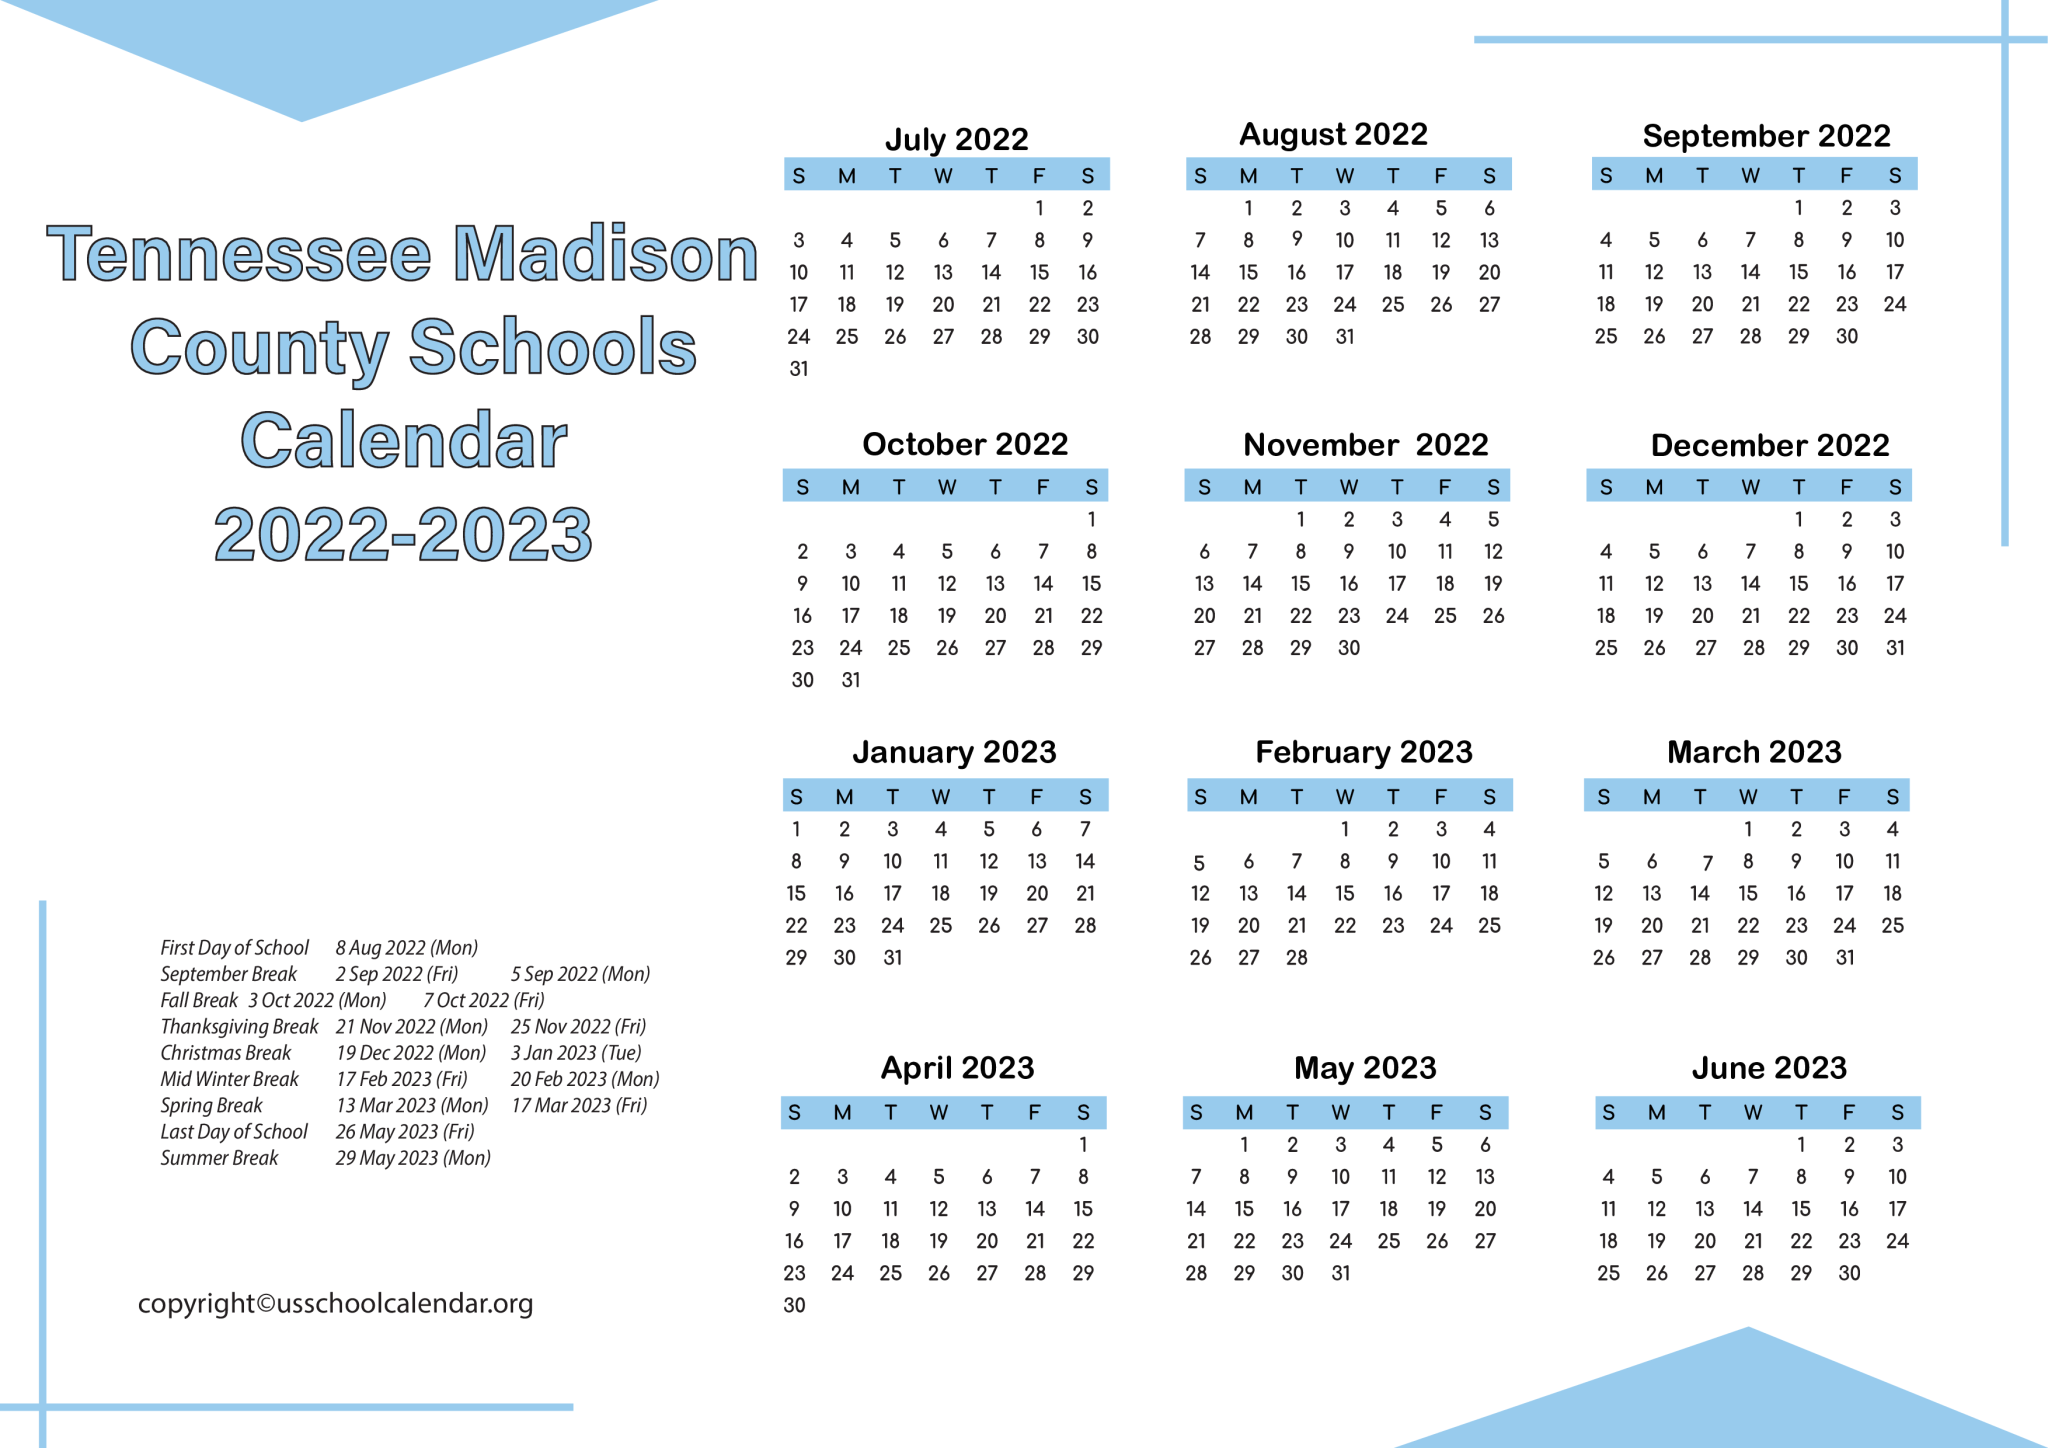 [JMCSS] Tennessee Madison County Schools Calendar 2023